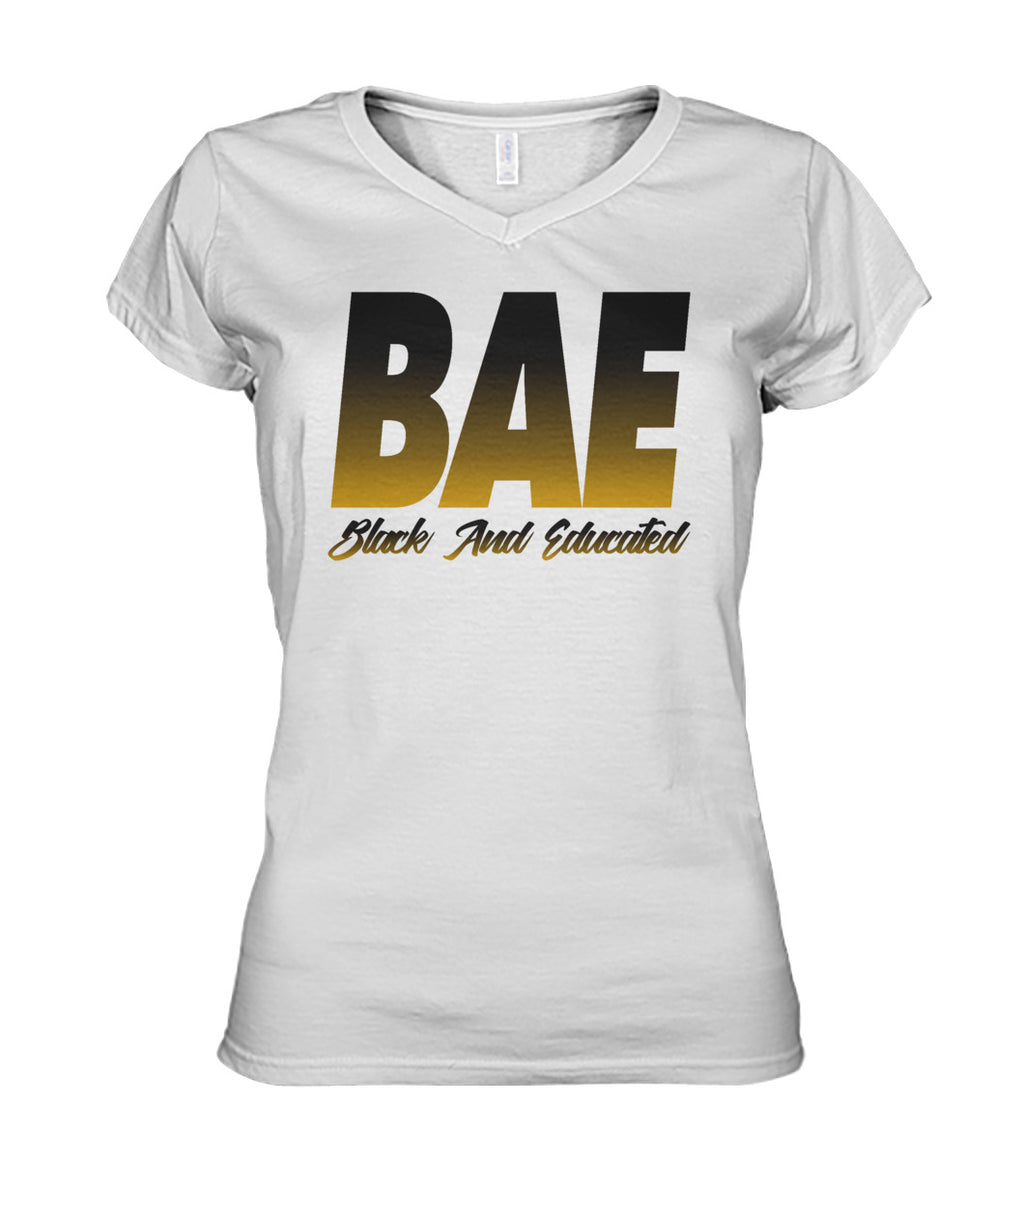 Black and Educated- Grambling Edition Women's V-Neck